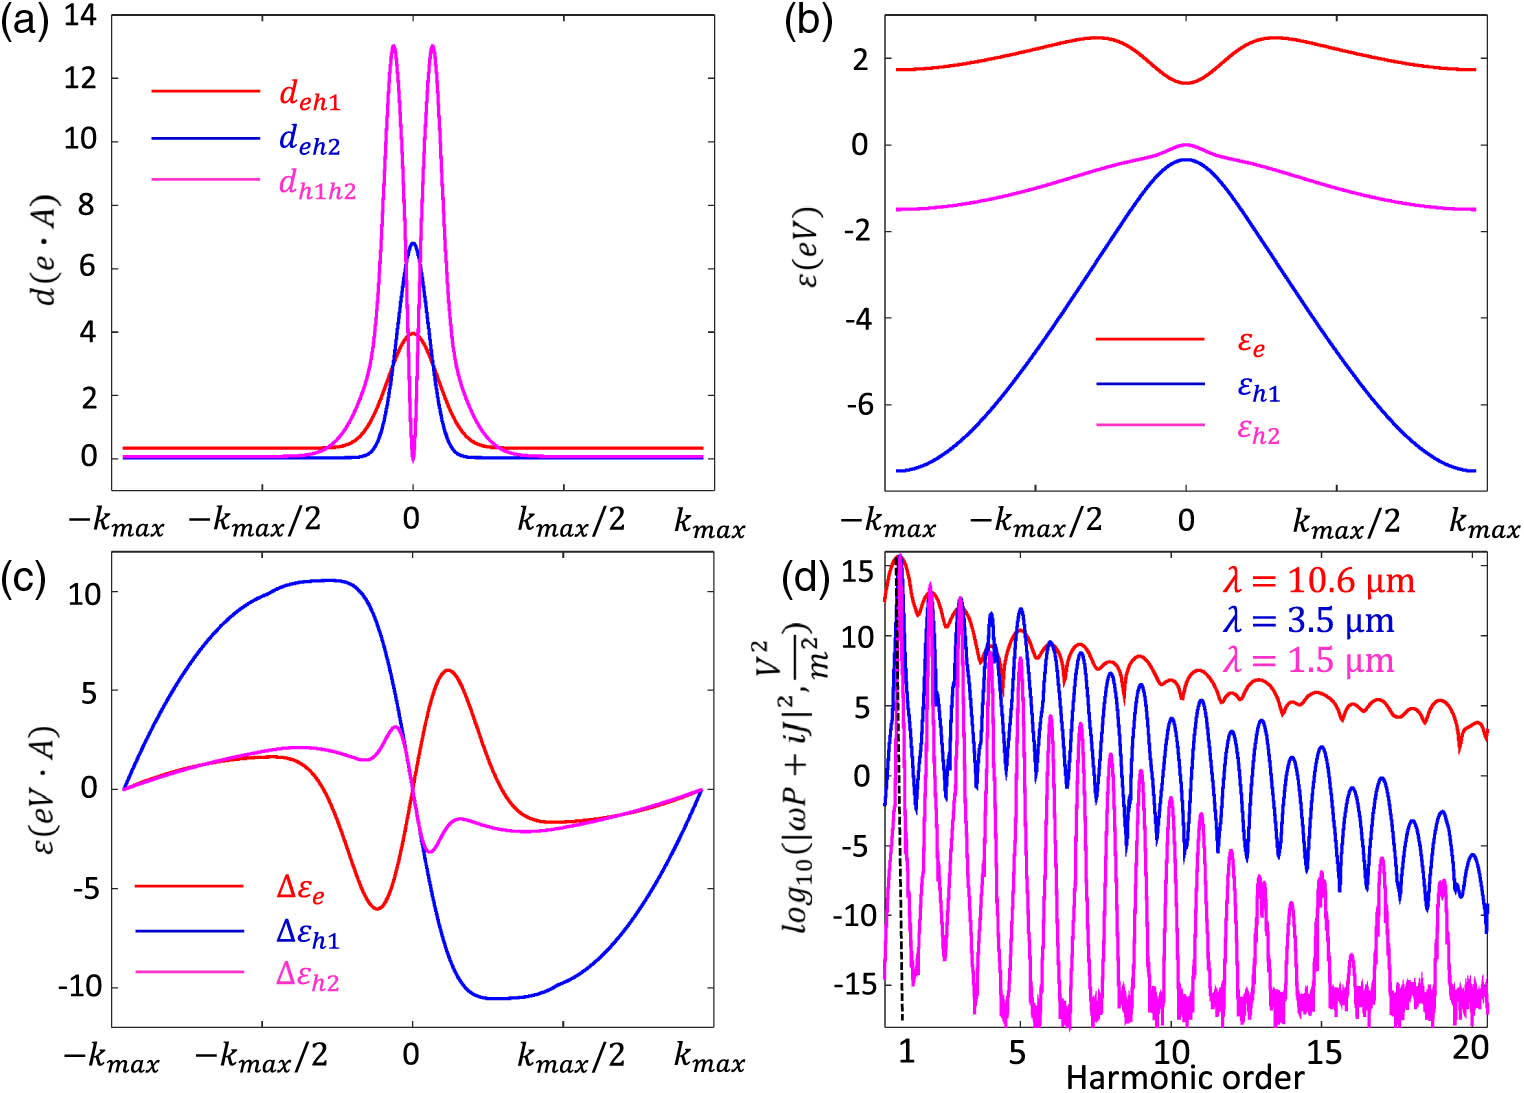 (a)–(c) Three-band structure for a non-centrosymmetric direct-gap semiconductor: GaAs (111) inspired (a) dipole coupling strength, (b) energies, and (c) their gradients. (d) High-harmonic spectra generated by an SBE model for E=108 V/m, θ=100 fs FWHM pulse duration and long-, mid-, and near-infrared wavelengths λ.